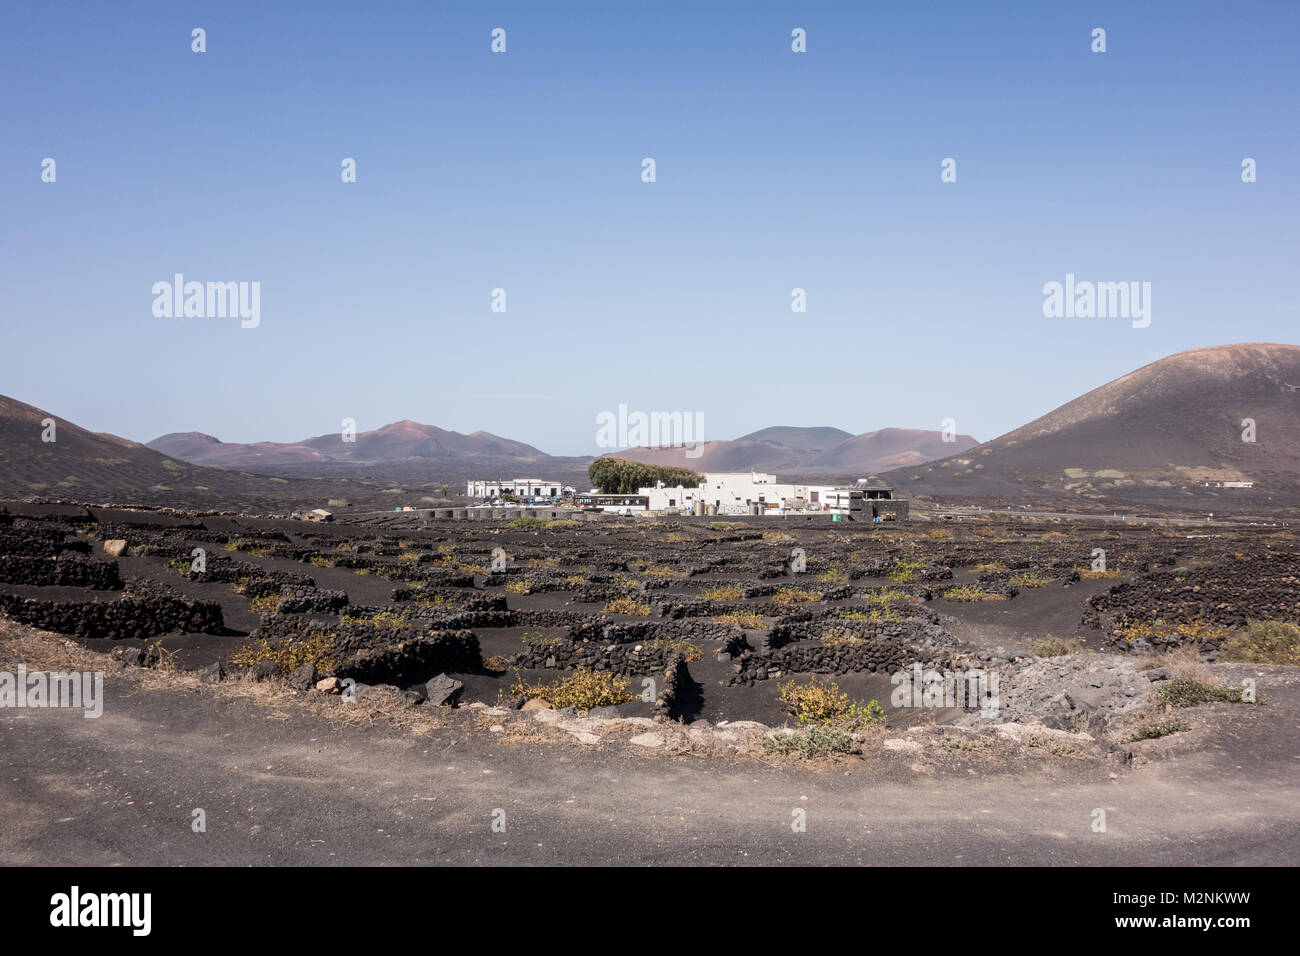 La Geria, Lanzarote - 8th Nov 2017. A traditional farm house surrounded by their vineyard with stoned walls to protect their grapes from the wind. Stock Photo